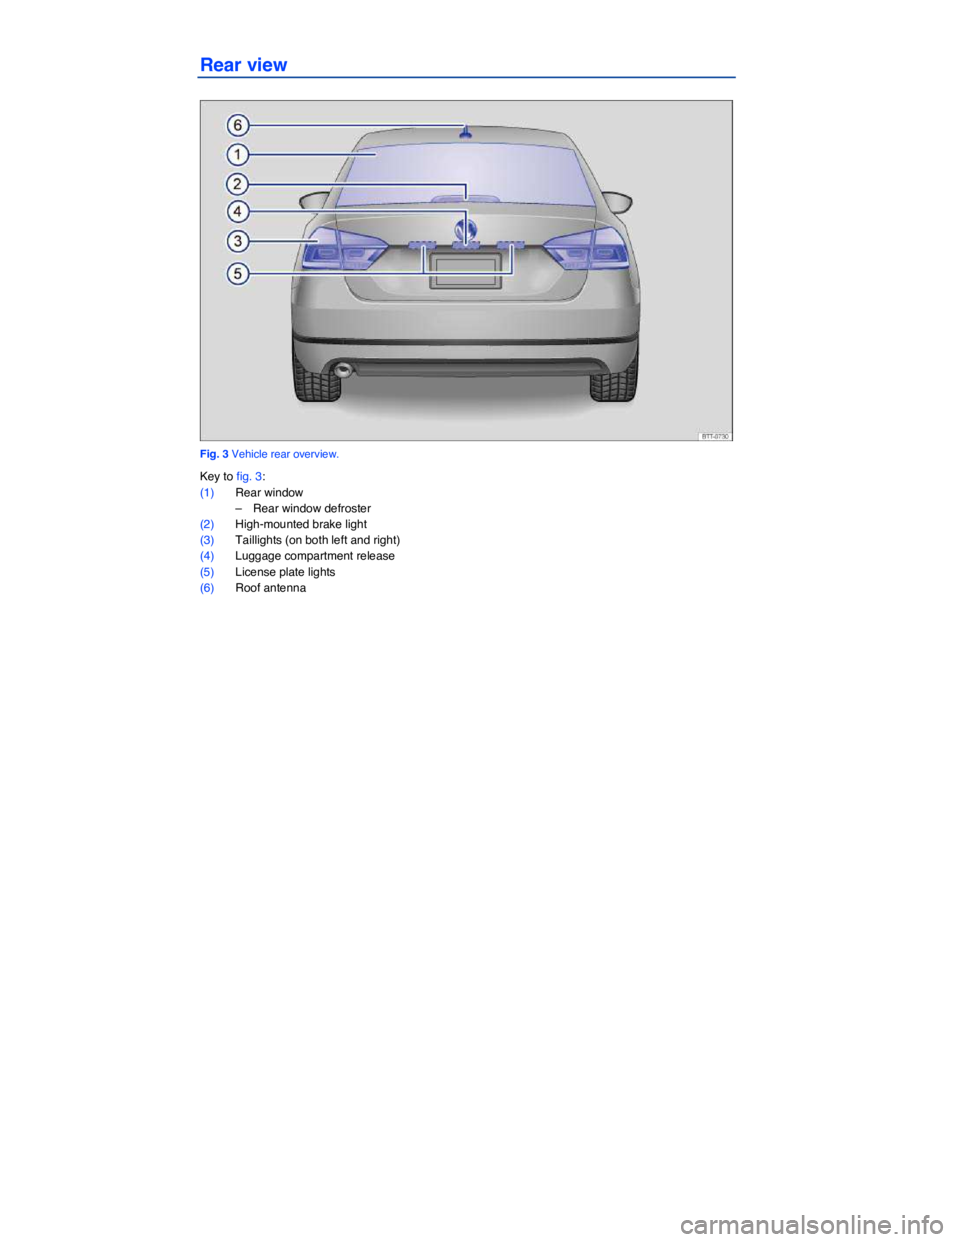 VOLKSWAGEN PASSAT 2014  Owner´s Manual  
Rear view 
 
Fig. 3 Vehicle rear overview. 
Key to fig. 3: 
(1) Rear window 
–  Rear window defroster  
(2) High-mounted brake light 
(3) Taillights (on both left and right)  
(4) Luggage compartm